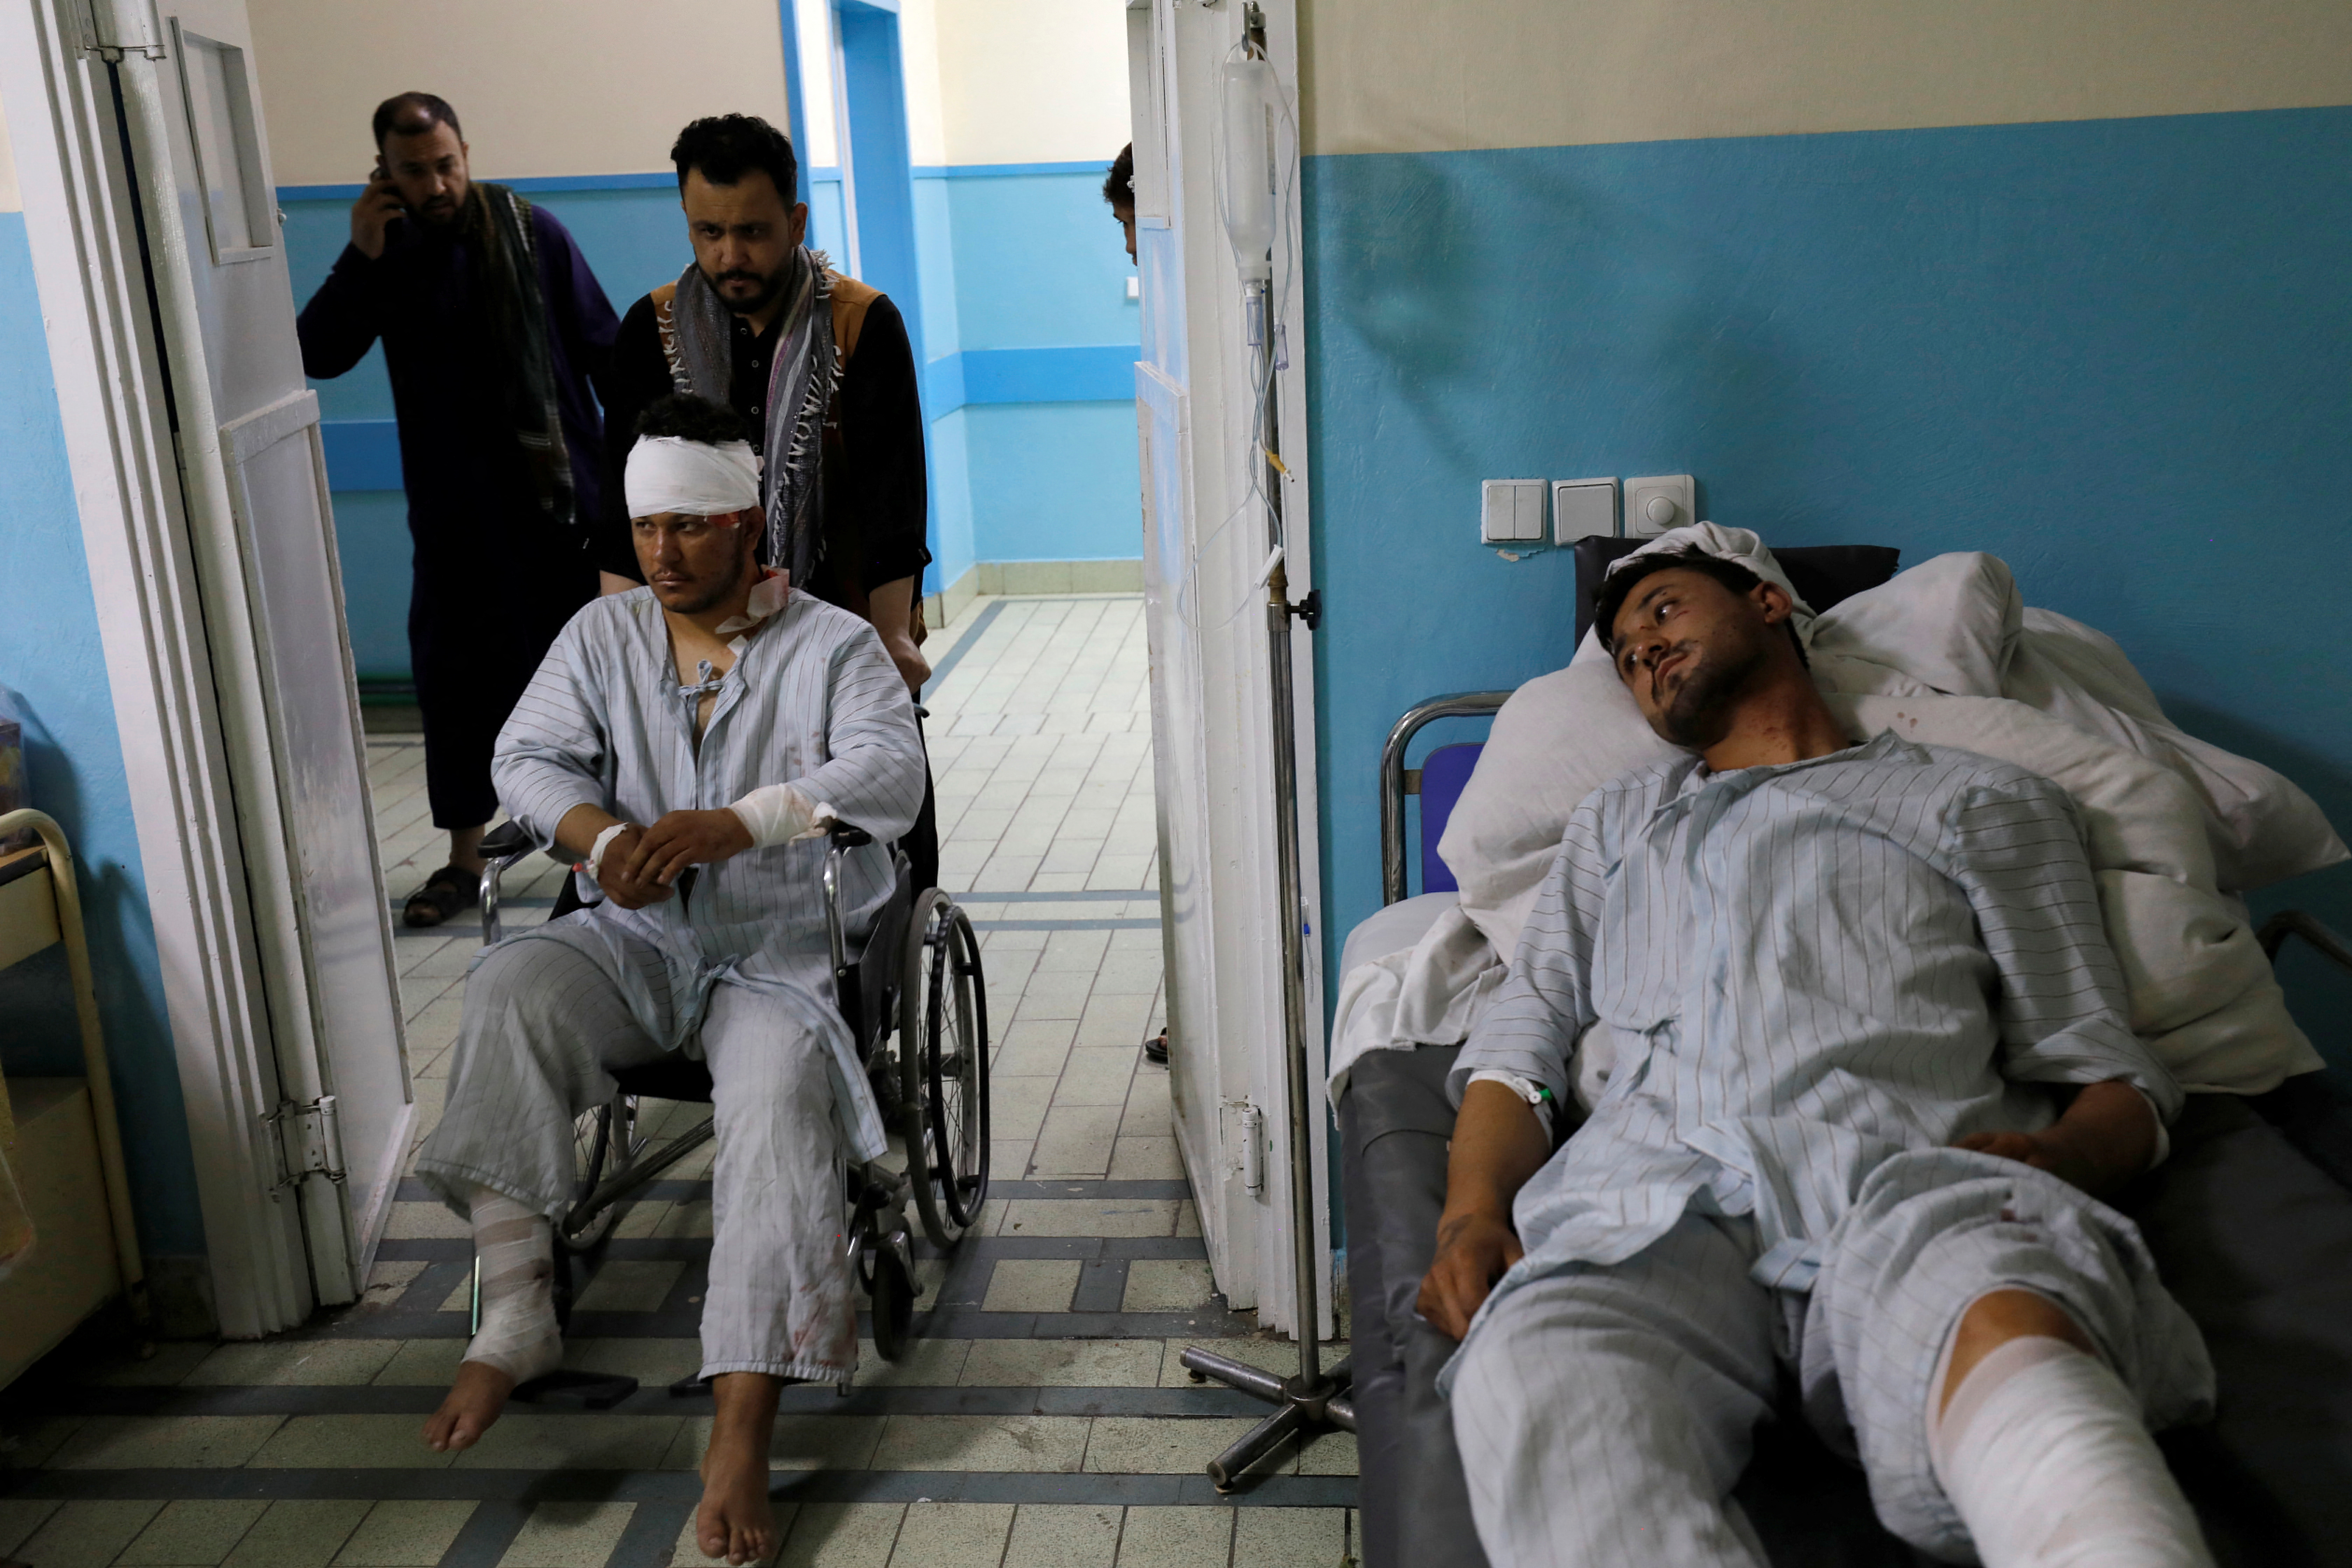 Wounded men are treated inside a hospital in Kabul